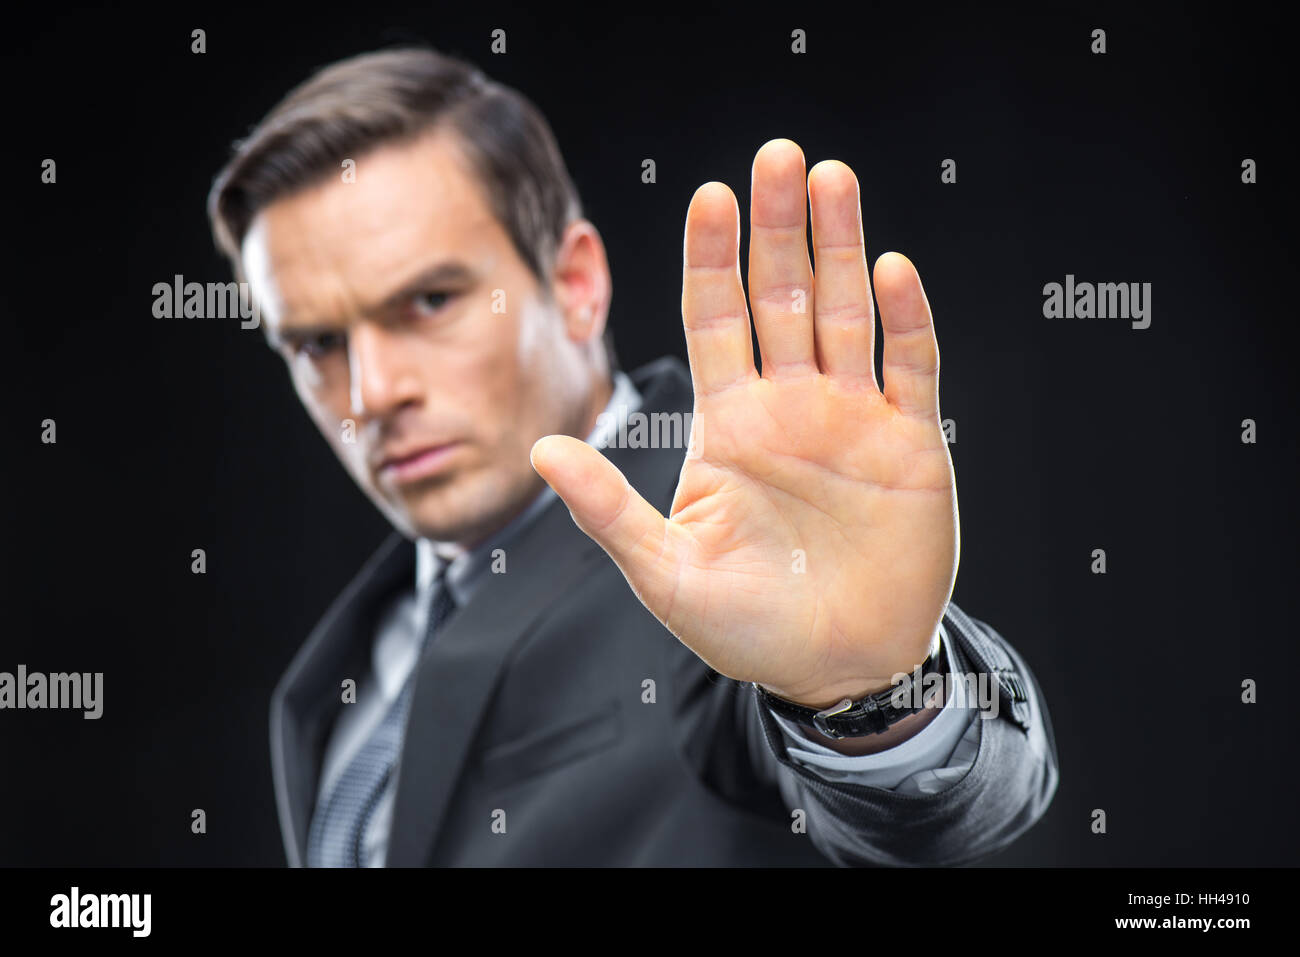 Close-up view of handsome businessman gesturing with palm and looking at camera Stock Photo